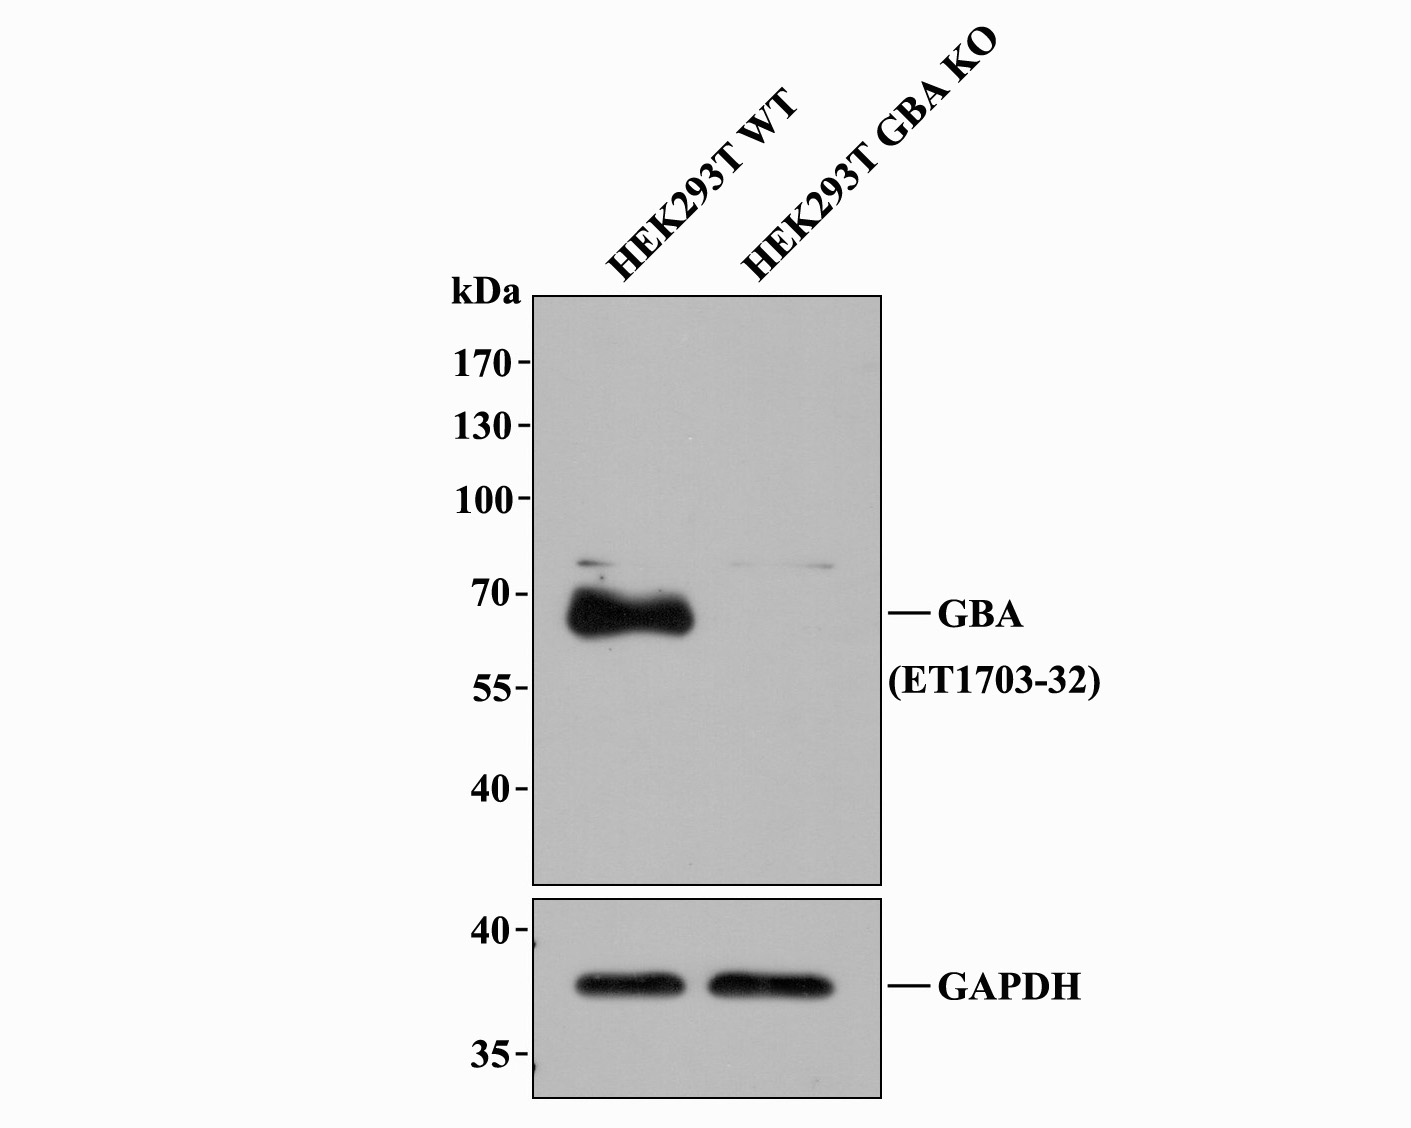 All lanes: Western blot analysis of GBA with anti-GBA antibody [JM10-76] (ET1703-32) at 1:1,000 dilution.<br />
Lane 1: Wild-type HEK293T whole cell lysate (20 µg).<br />
Lane 2: GBA knockout HEK293T whole cell lysate (20 µg).<br />
<br />
ET1703-32 was shown to specifically react with GBA in wild-type HEK293T cells. No band was observed when GBA knockout sample was tested. Wild-type and GBA knockout samples were subjected to SDS-PAGE. Proteins were transferred to a PVDF membrane and blocked with 5% NFDM in TBST for 1 hour at room temperature. The primary antibody (ET1703-32, 1/1,000) and Loading control antibody (Rabbit anti-GAPDH , ET1601-4, 1/10,000) was used in 5% BSA at room temperature for 2 hours. Goat Anti-Rabbit IgG-HRP Secondary Antibody (HA1001) at 1:200,000 dilution was used for 1 hour at room temperature.